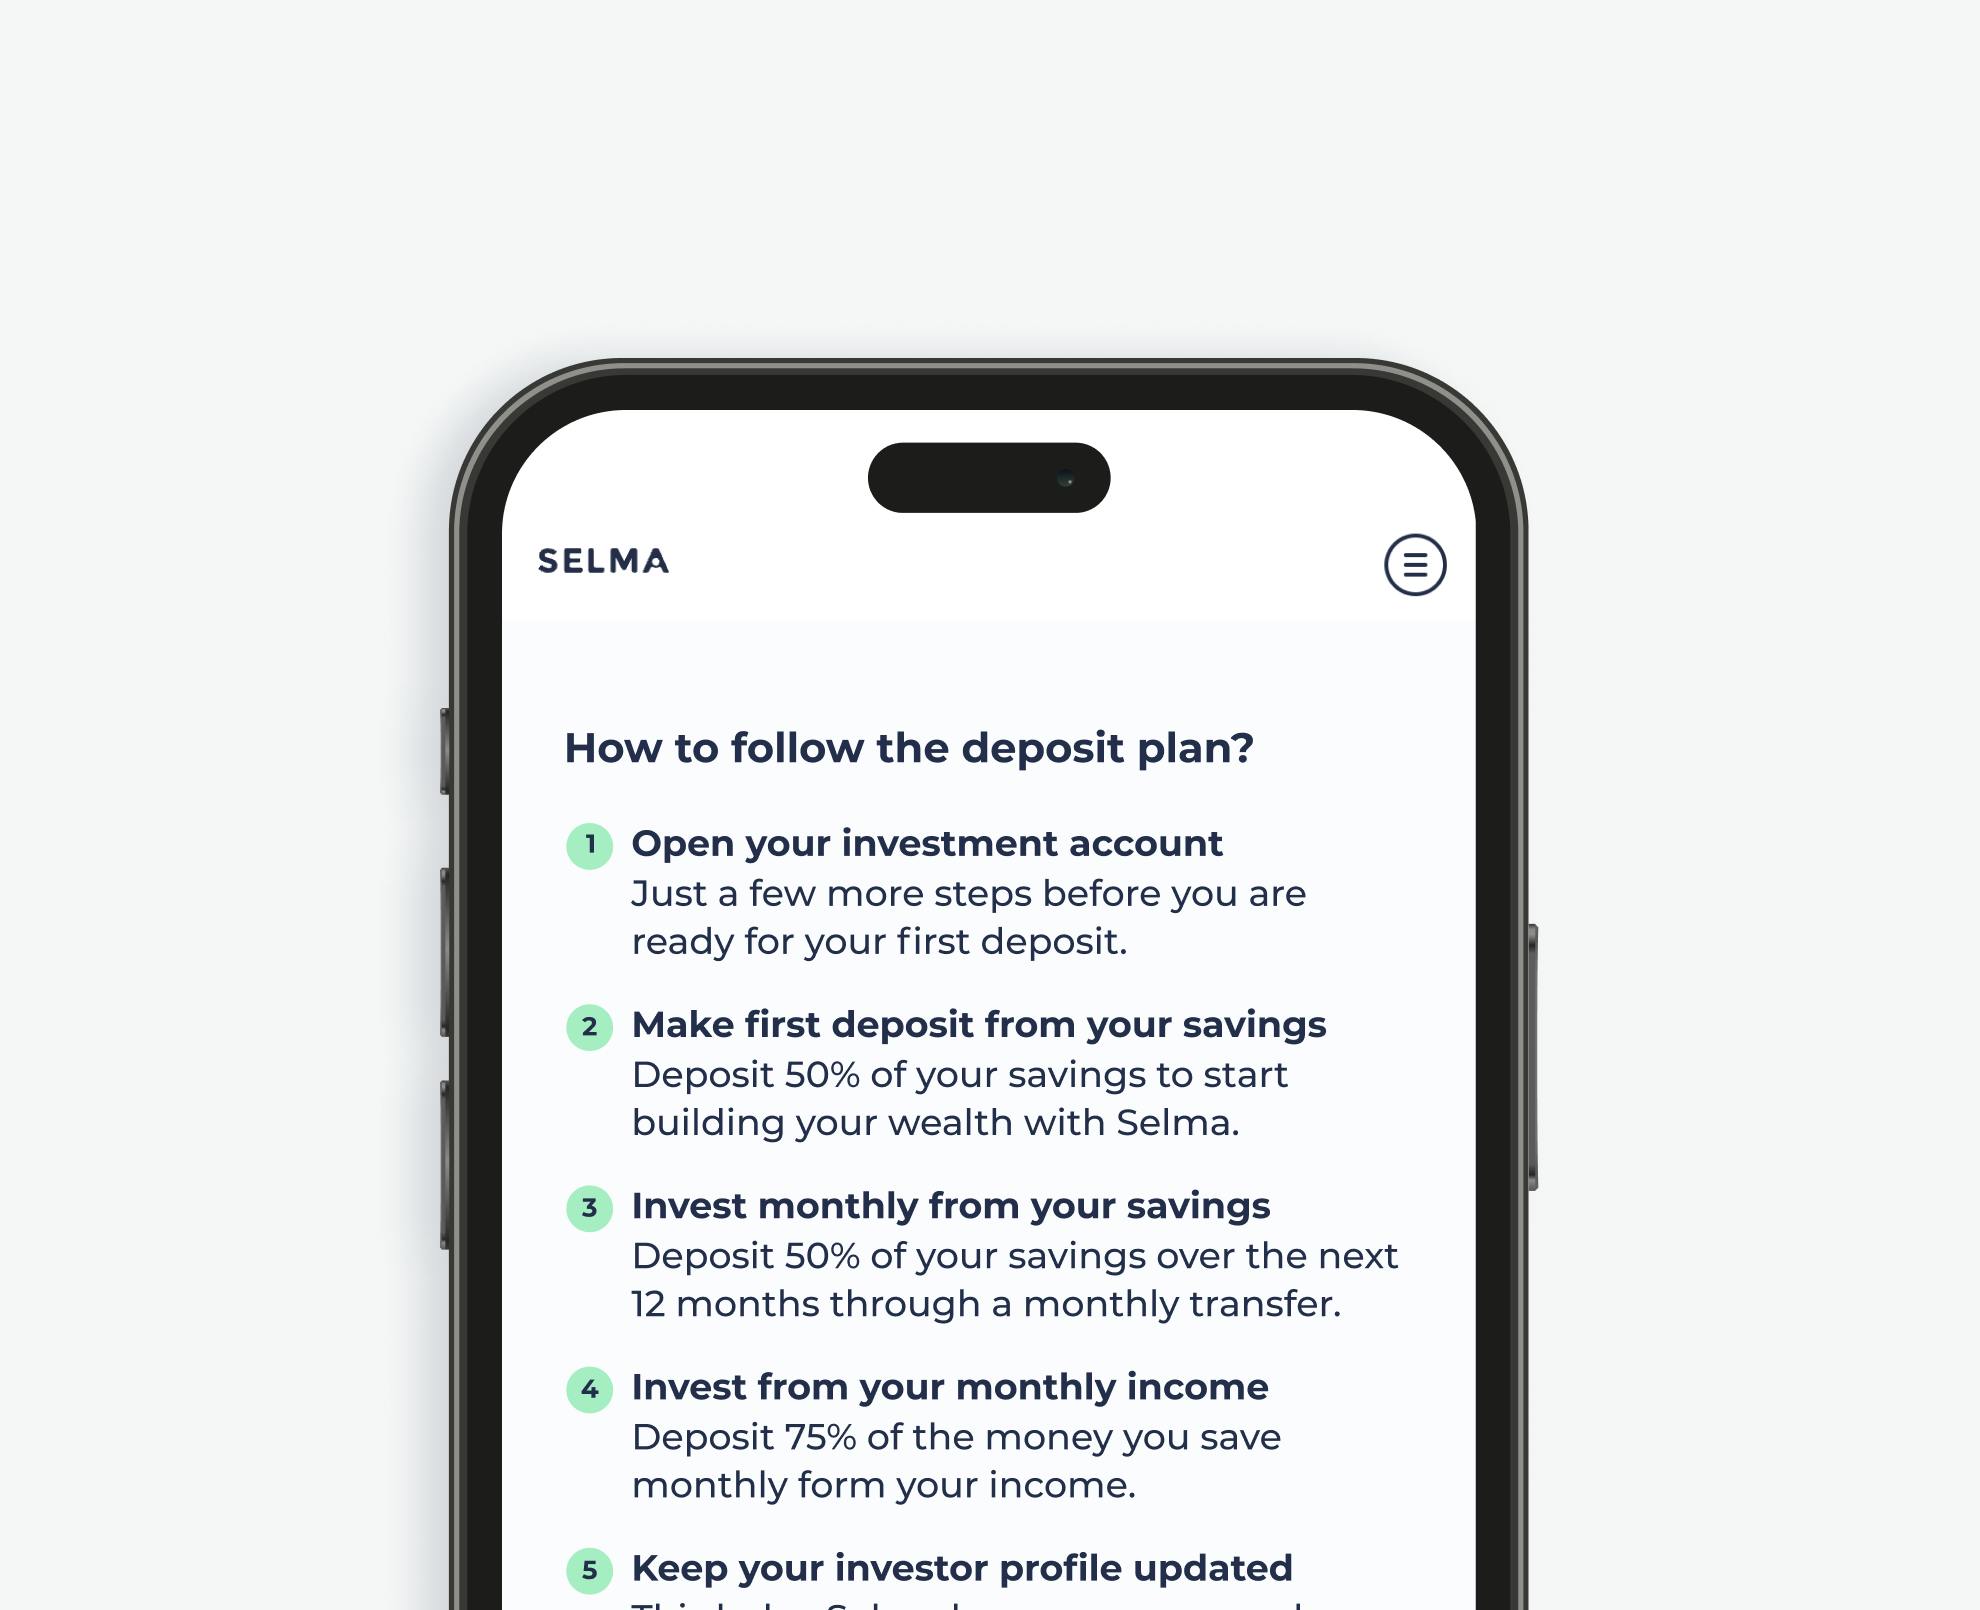 deposit plan shown on a mobile phone - how to follow the deposit plan?